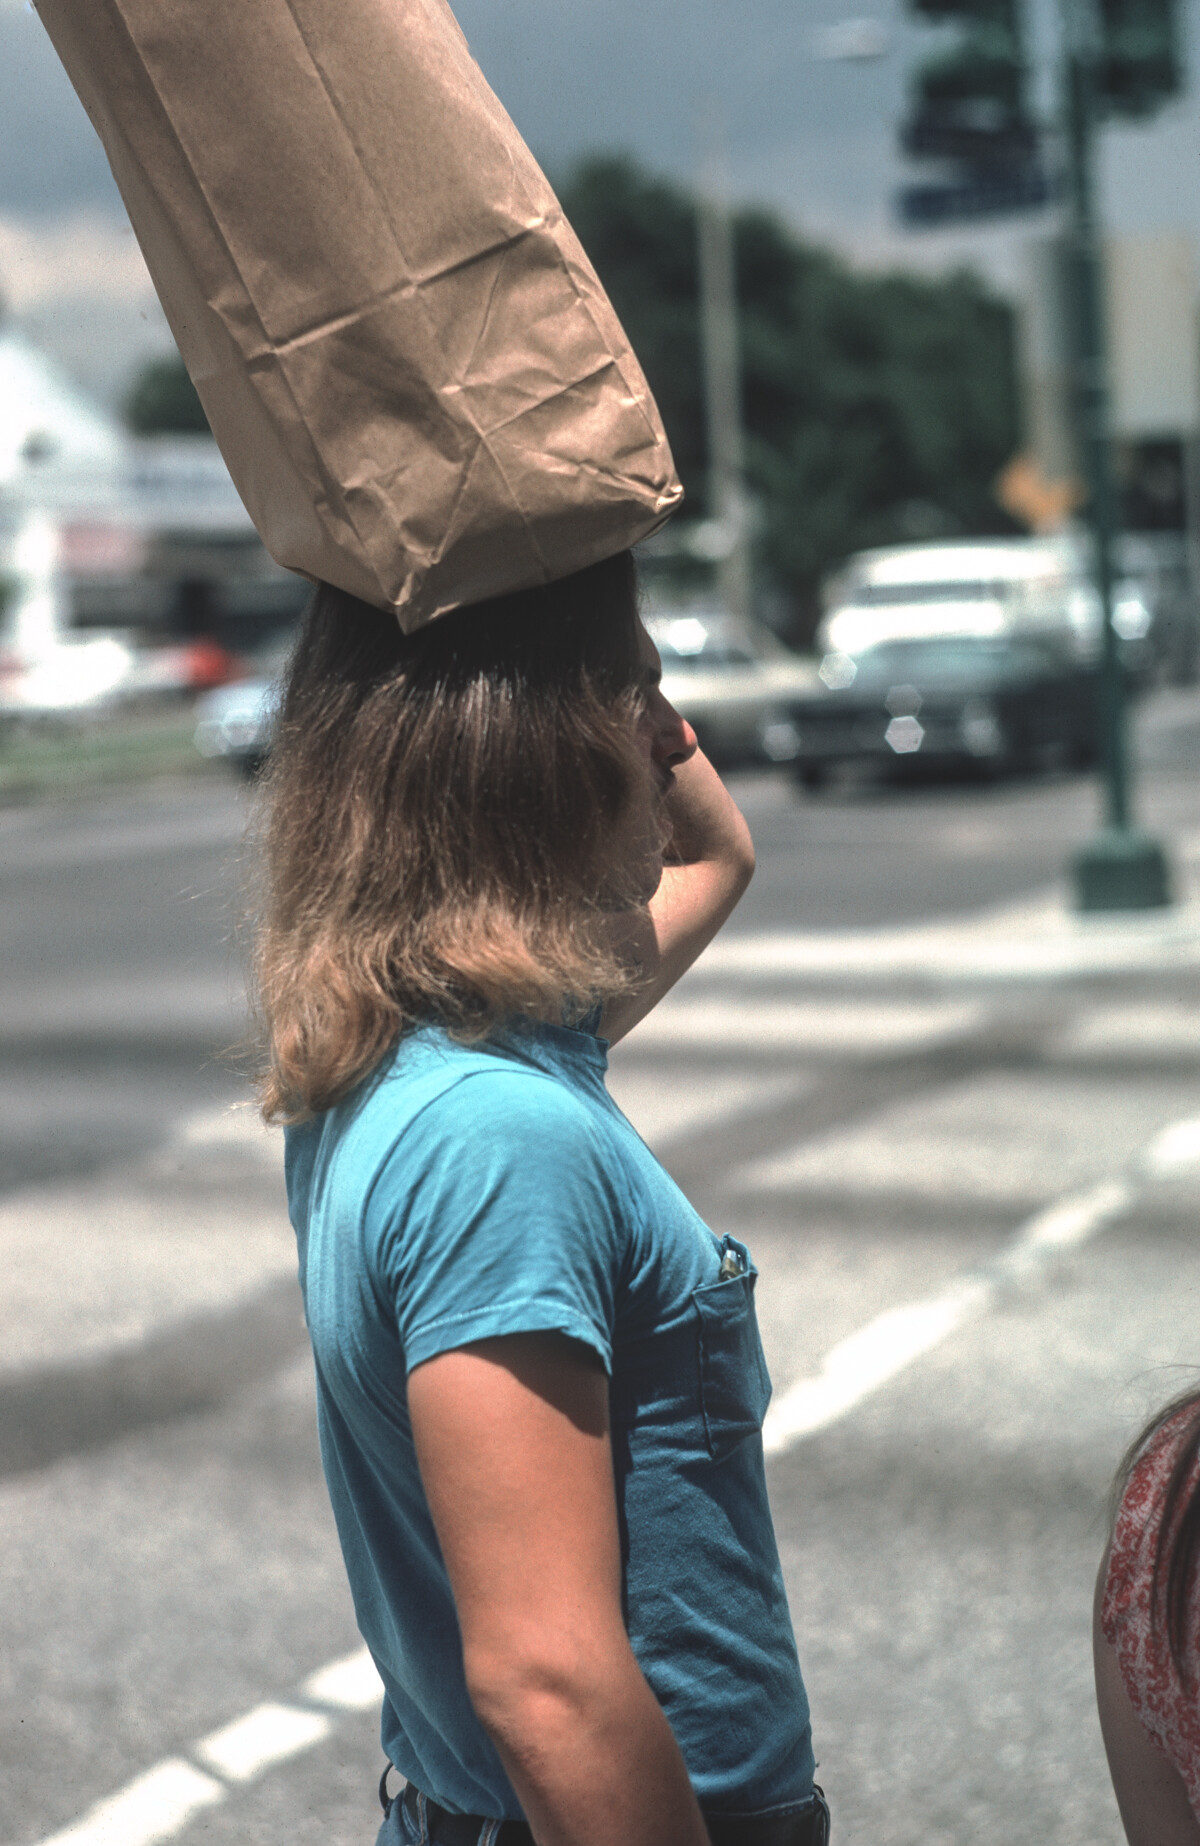 Man shopping New Orleans 1976